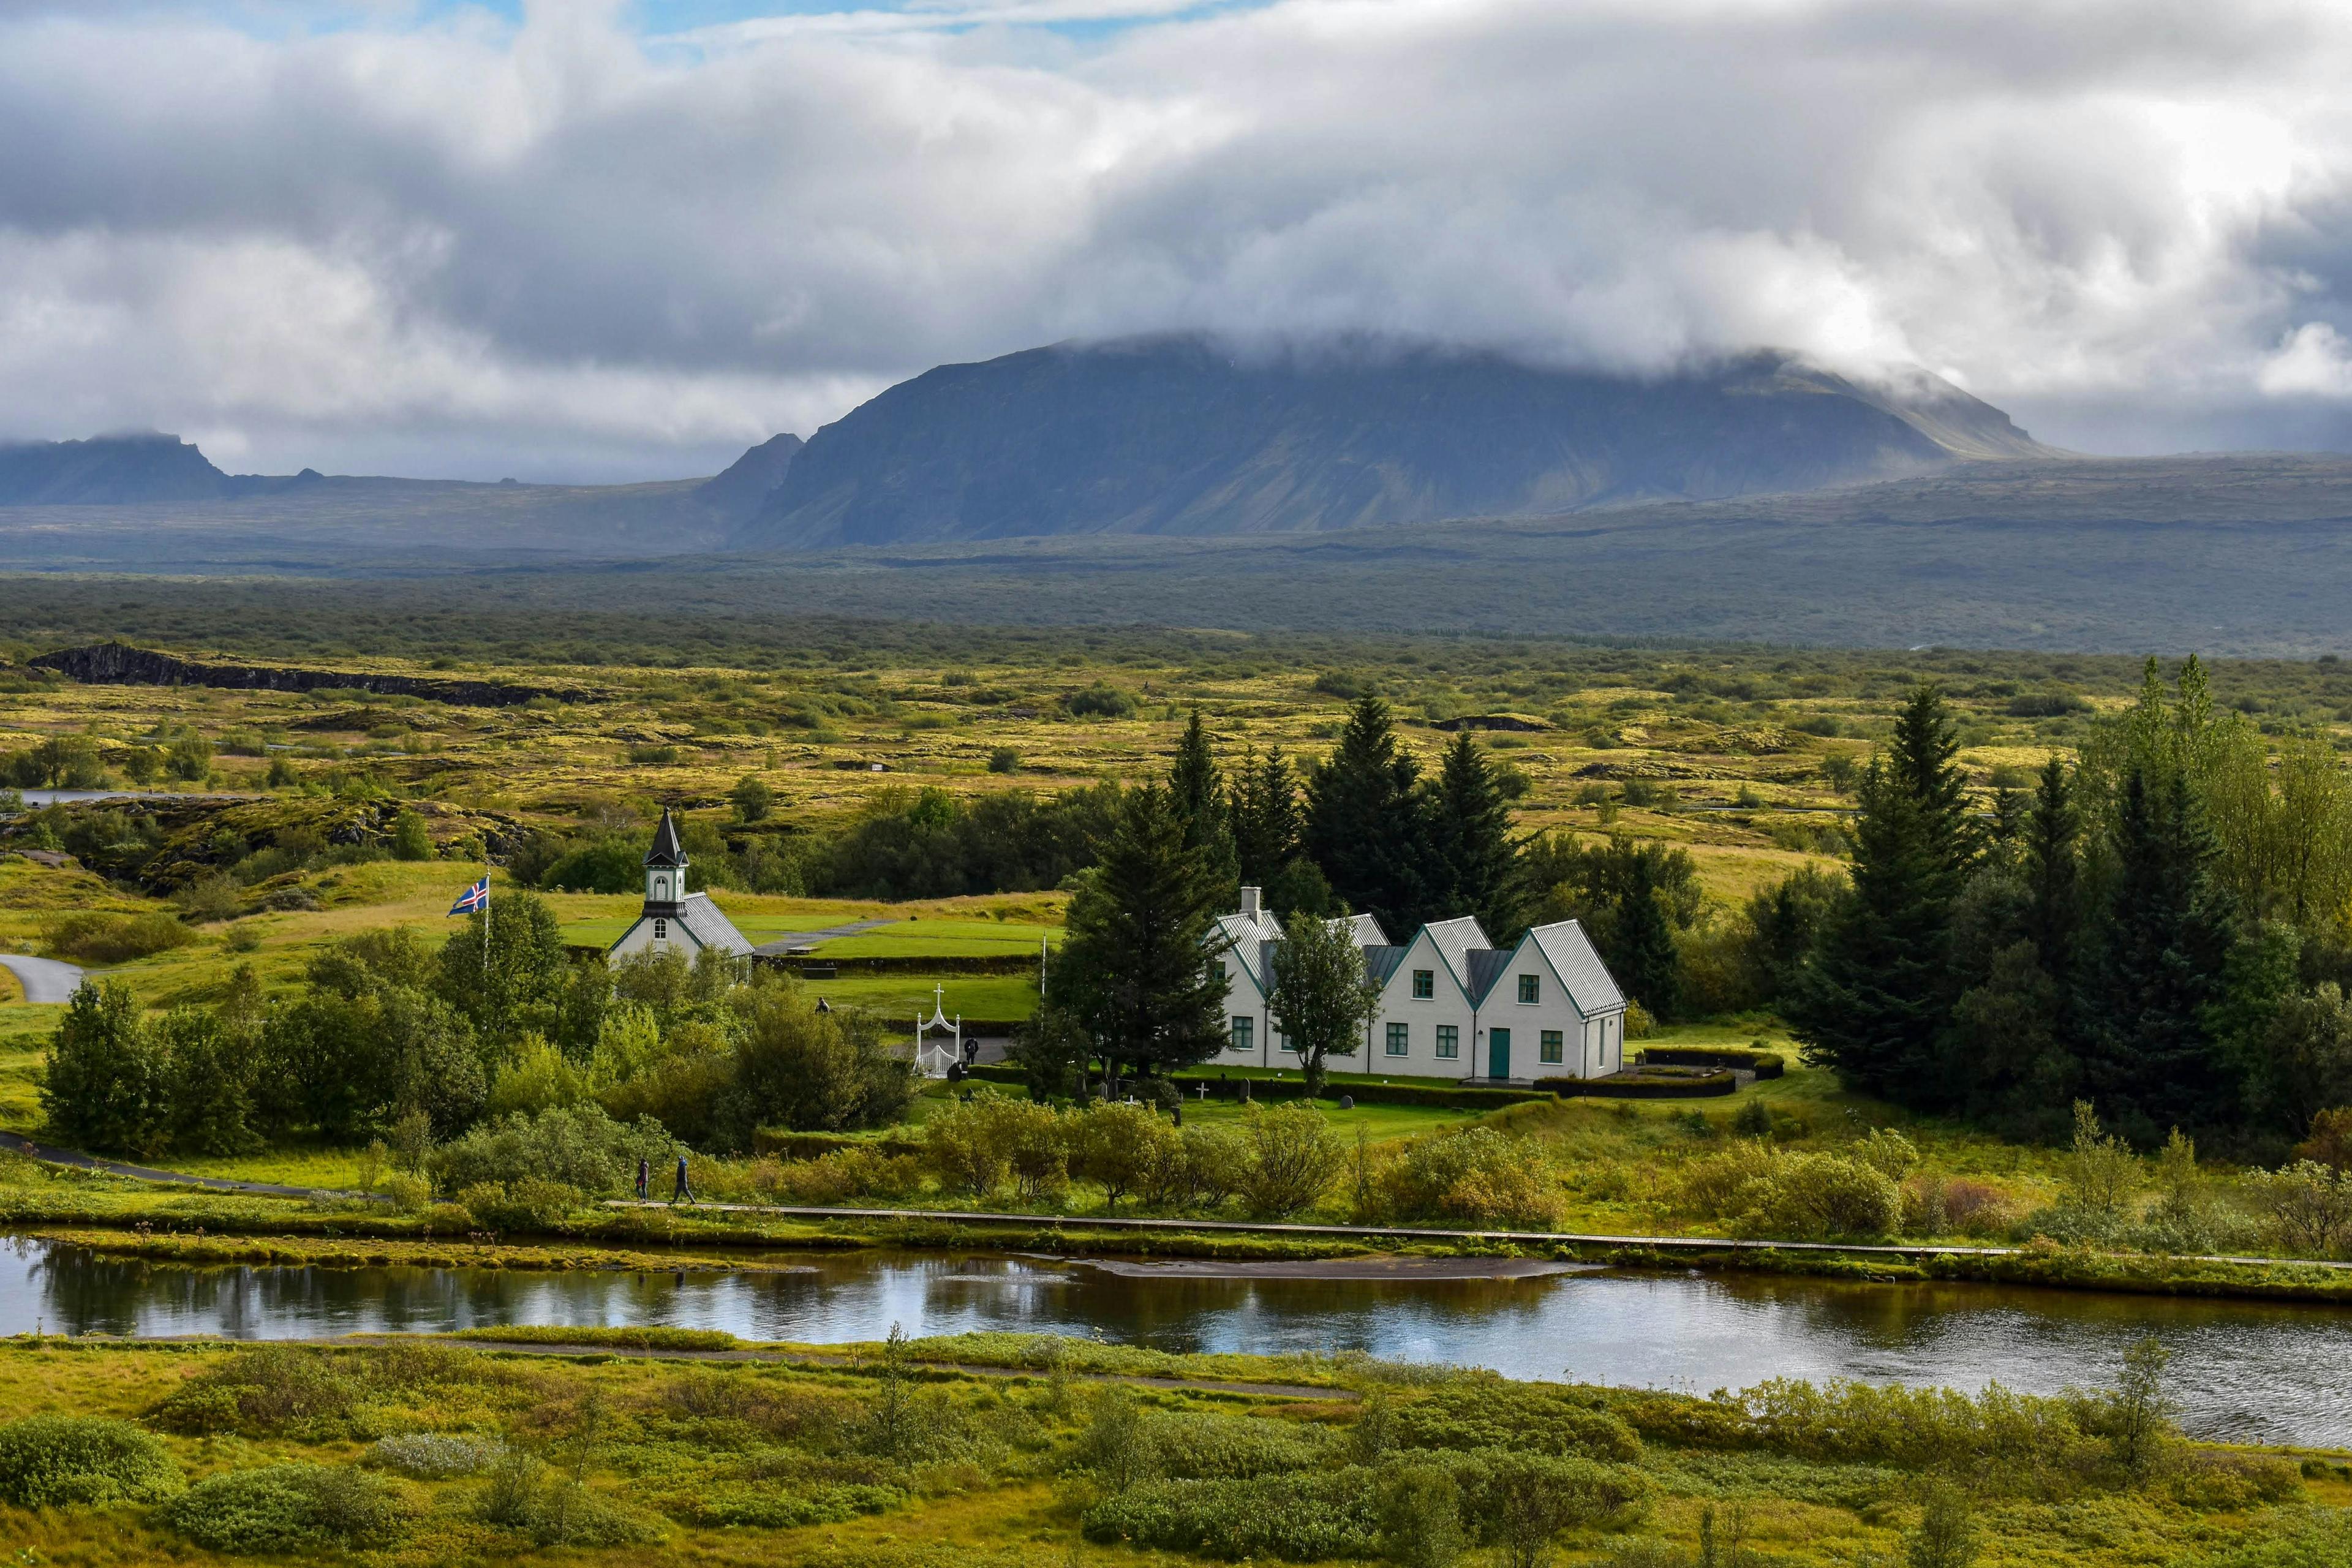 A serene landscape bathed in warm sunlight, featuring a small settlement with traditional buildings near a river, nestled within the vast, open plains and gentle hills in Þingvellir (Thingvellir) National Park in Iceland.